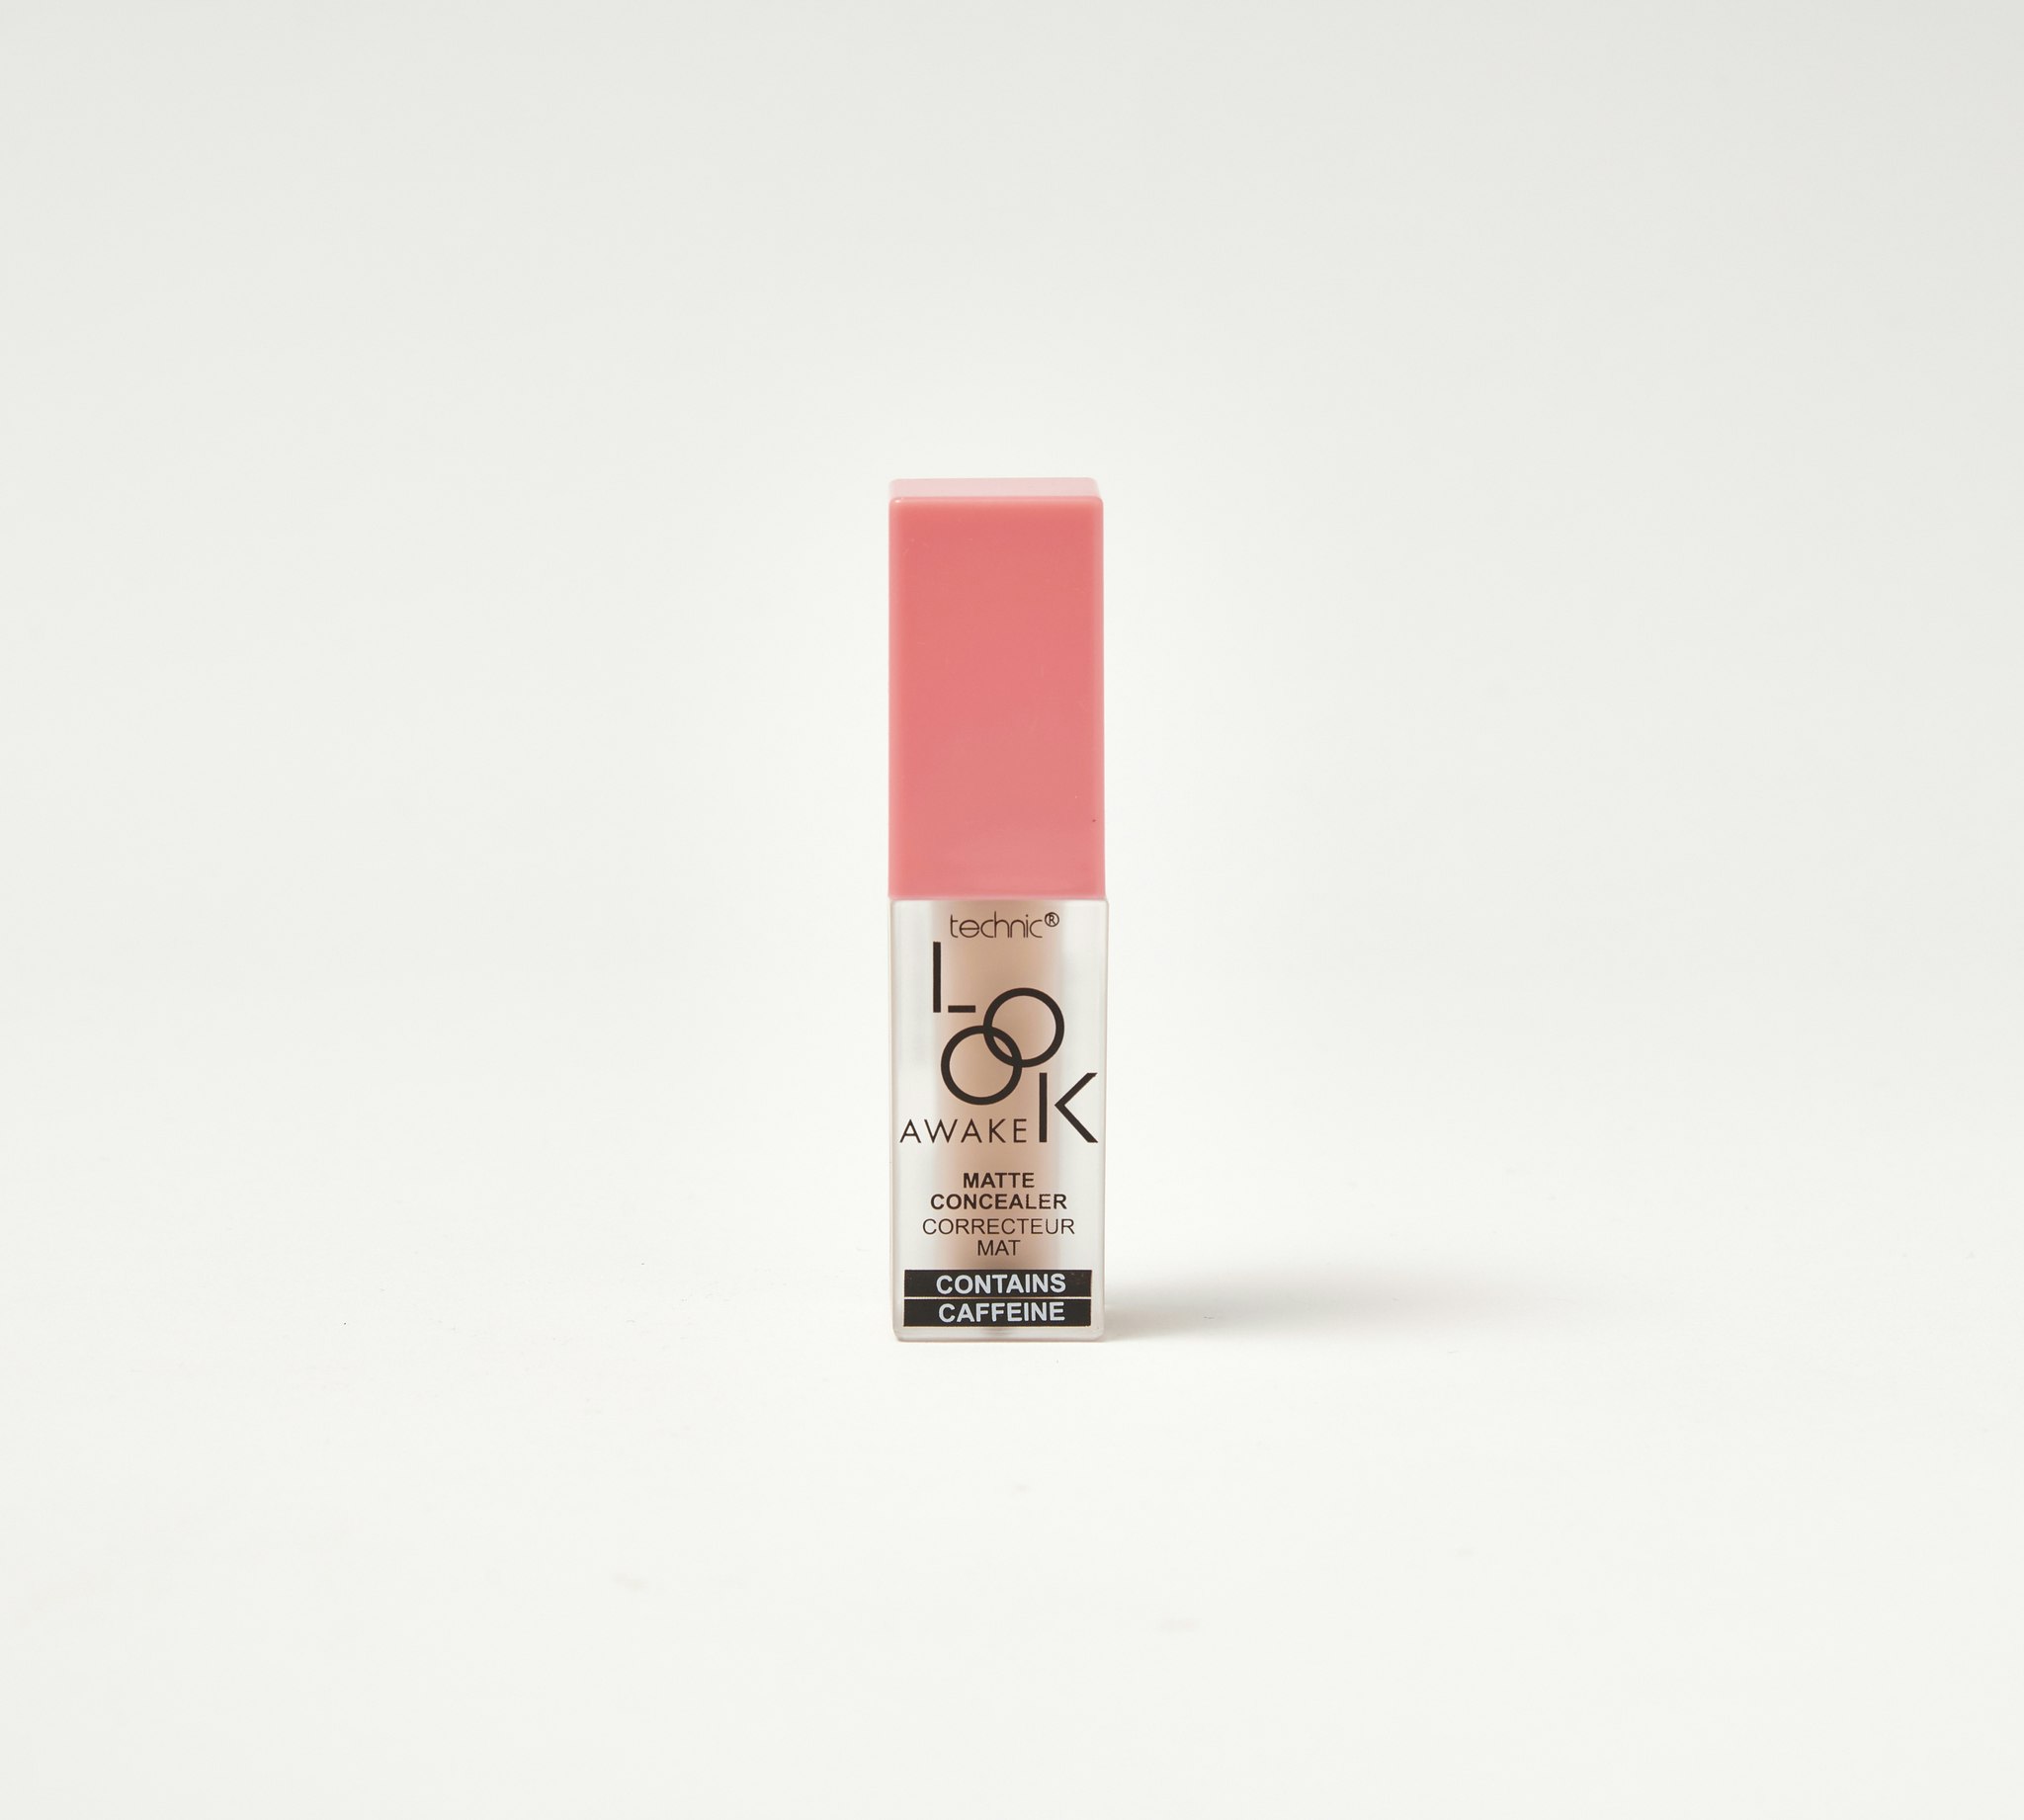 Technic Look Awake Matte Concealer - Toasted Oats